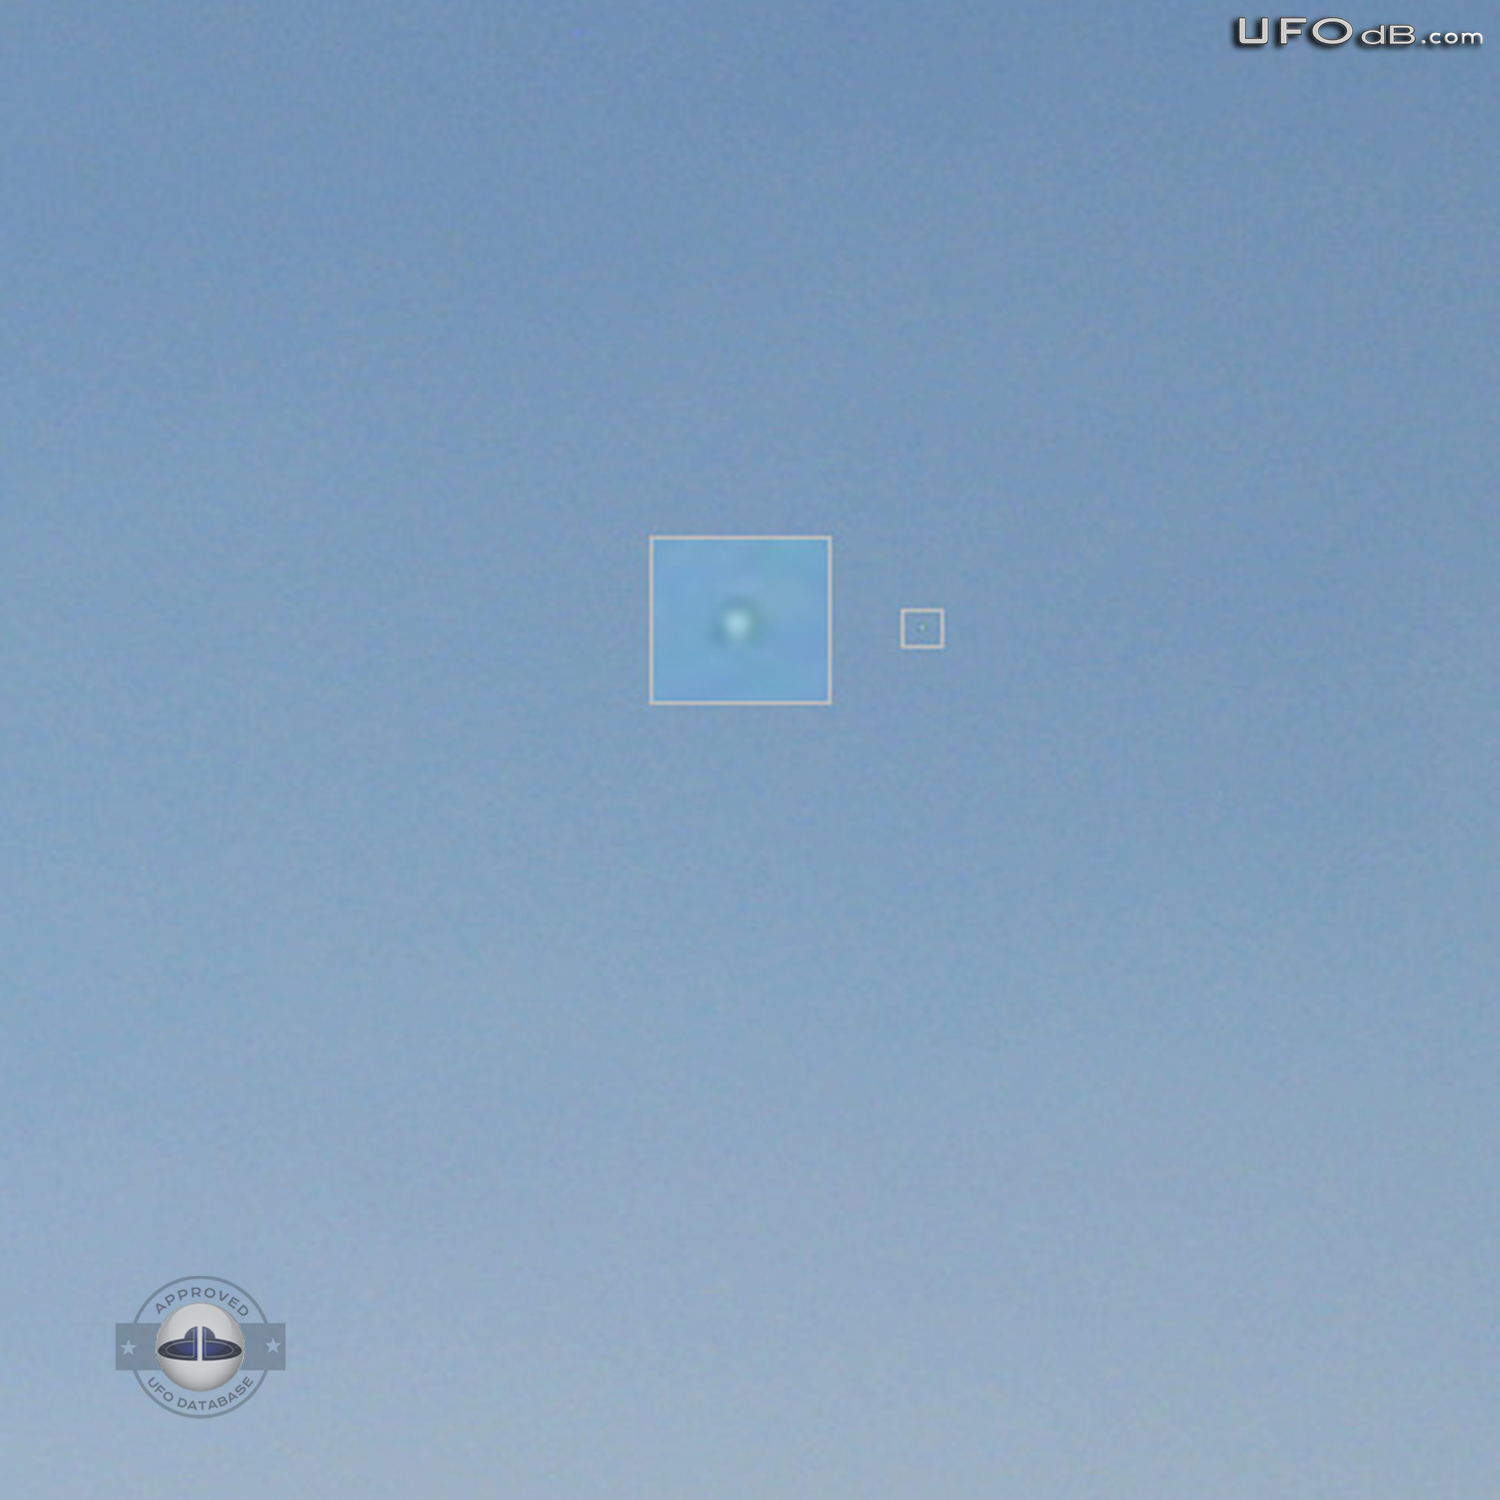 Two Fast Metallic UFOs over the mountains | Afghanistan | April 4 2011 UFO Picture #269-3